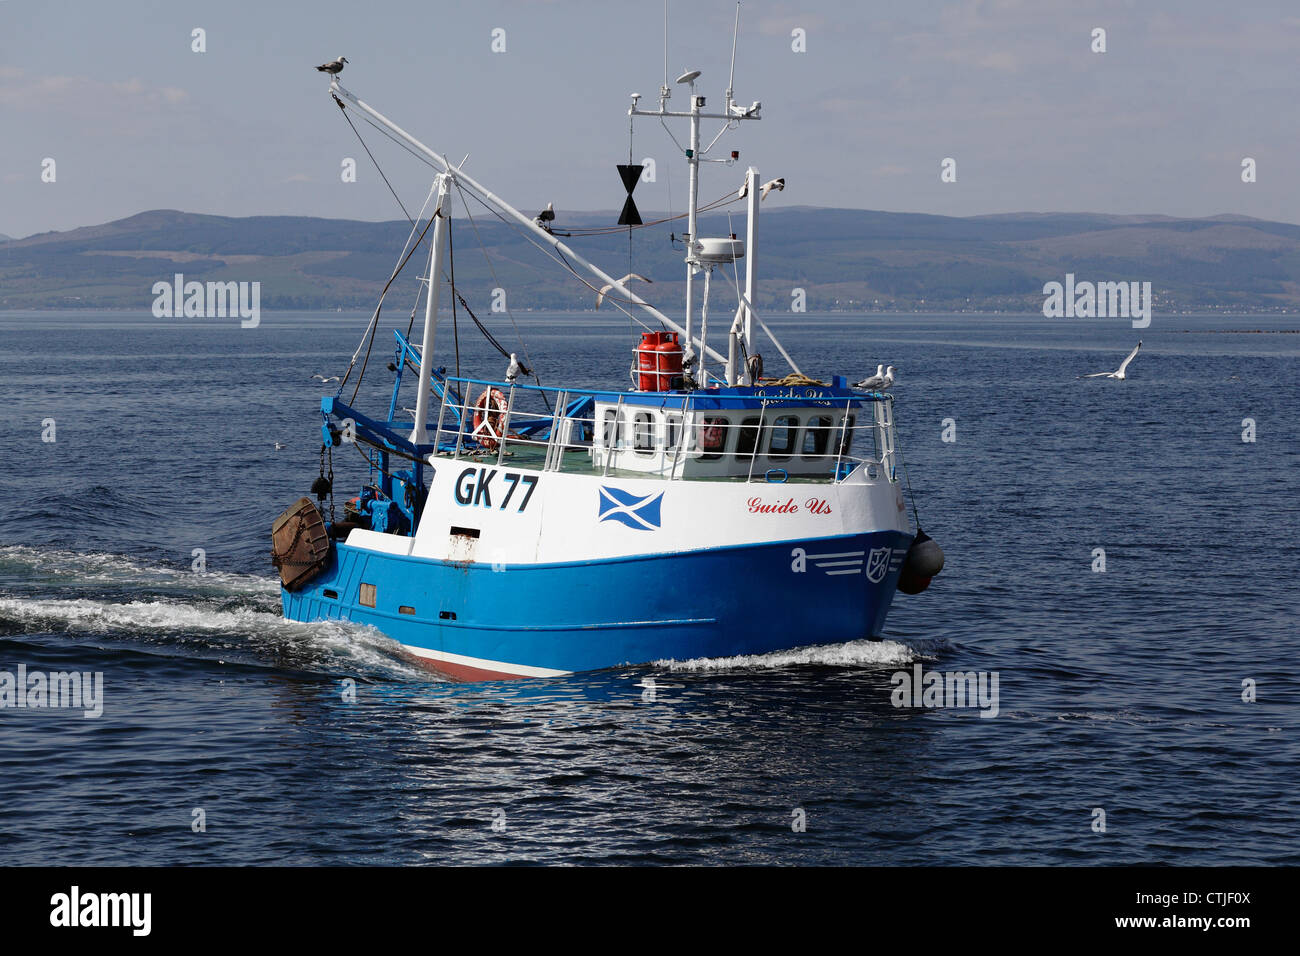 Small fishing boat Guide Us sailing off Largs  in the Firth of Clyde, North Ayrshire, Scotland, UK Stock Photo